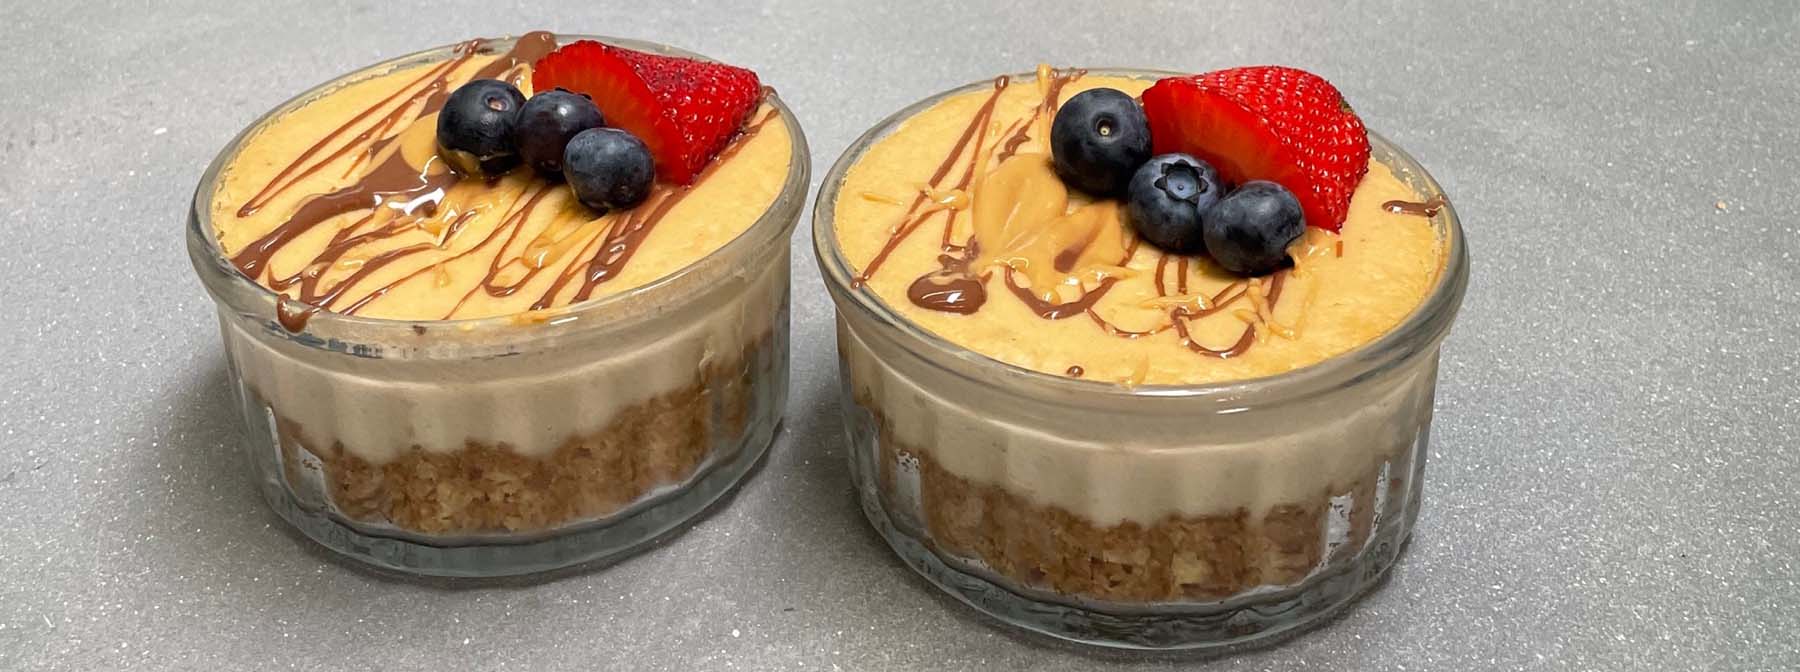 High-Protein Peanut Butter Cheesecake